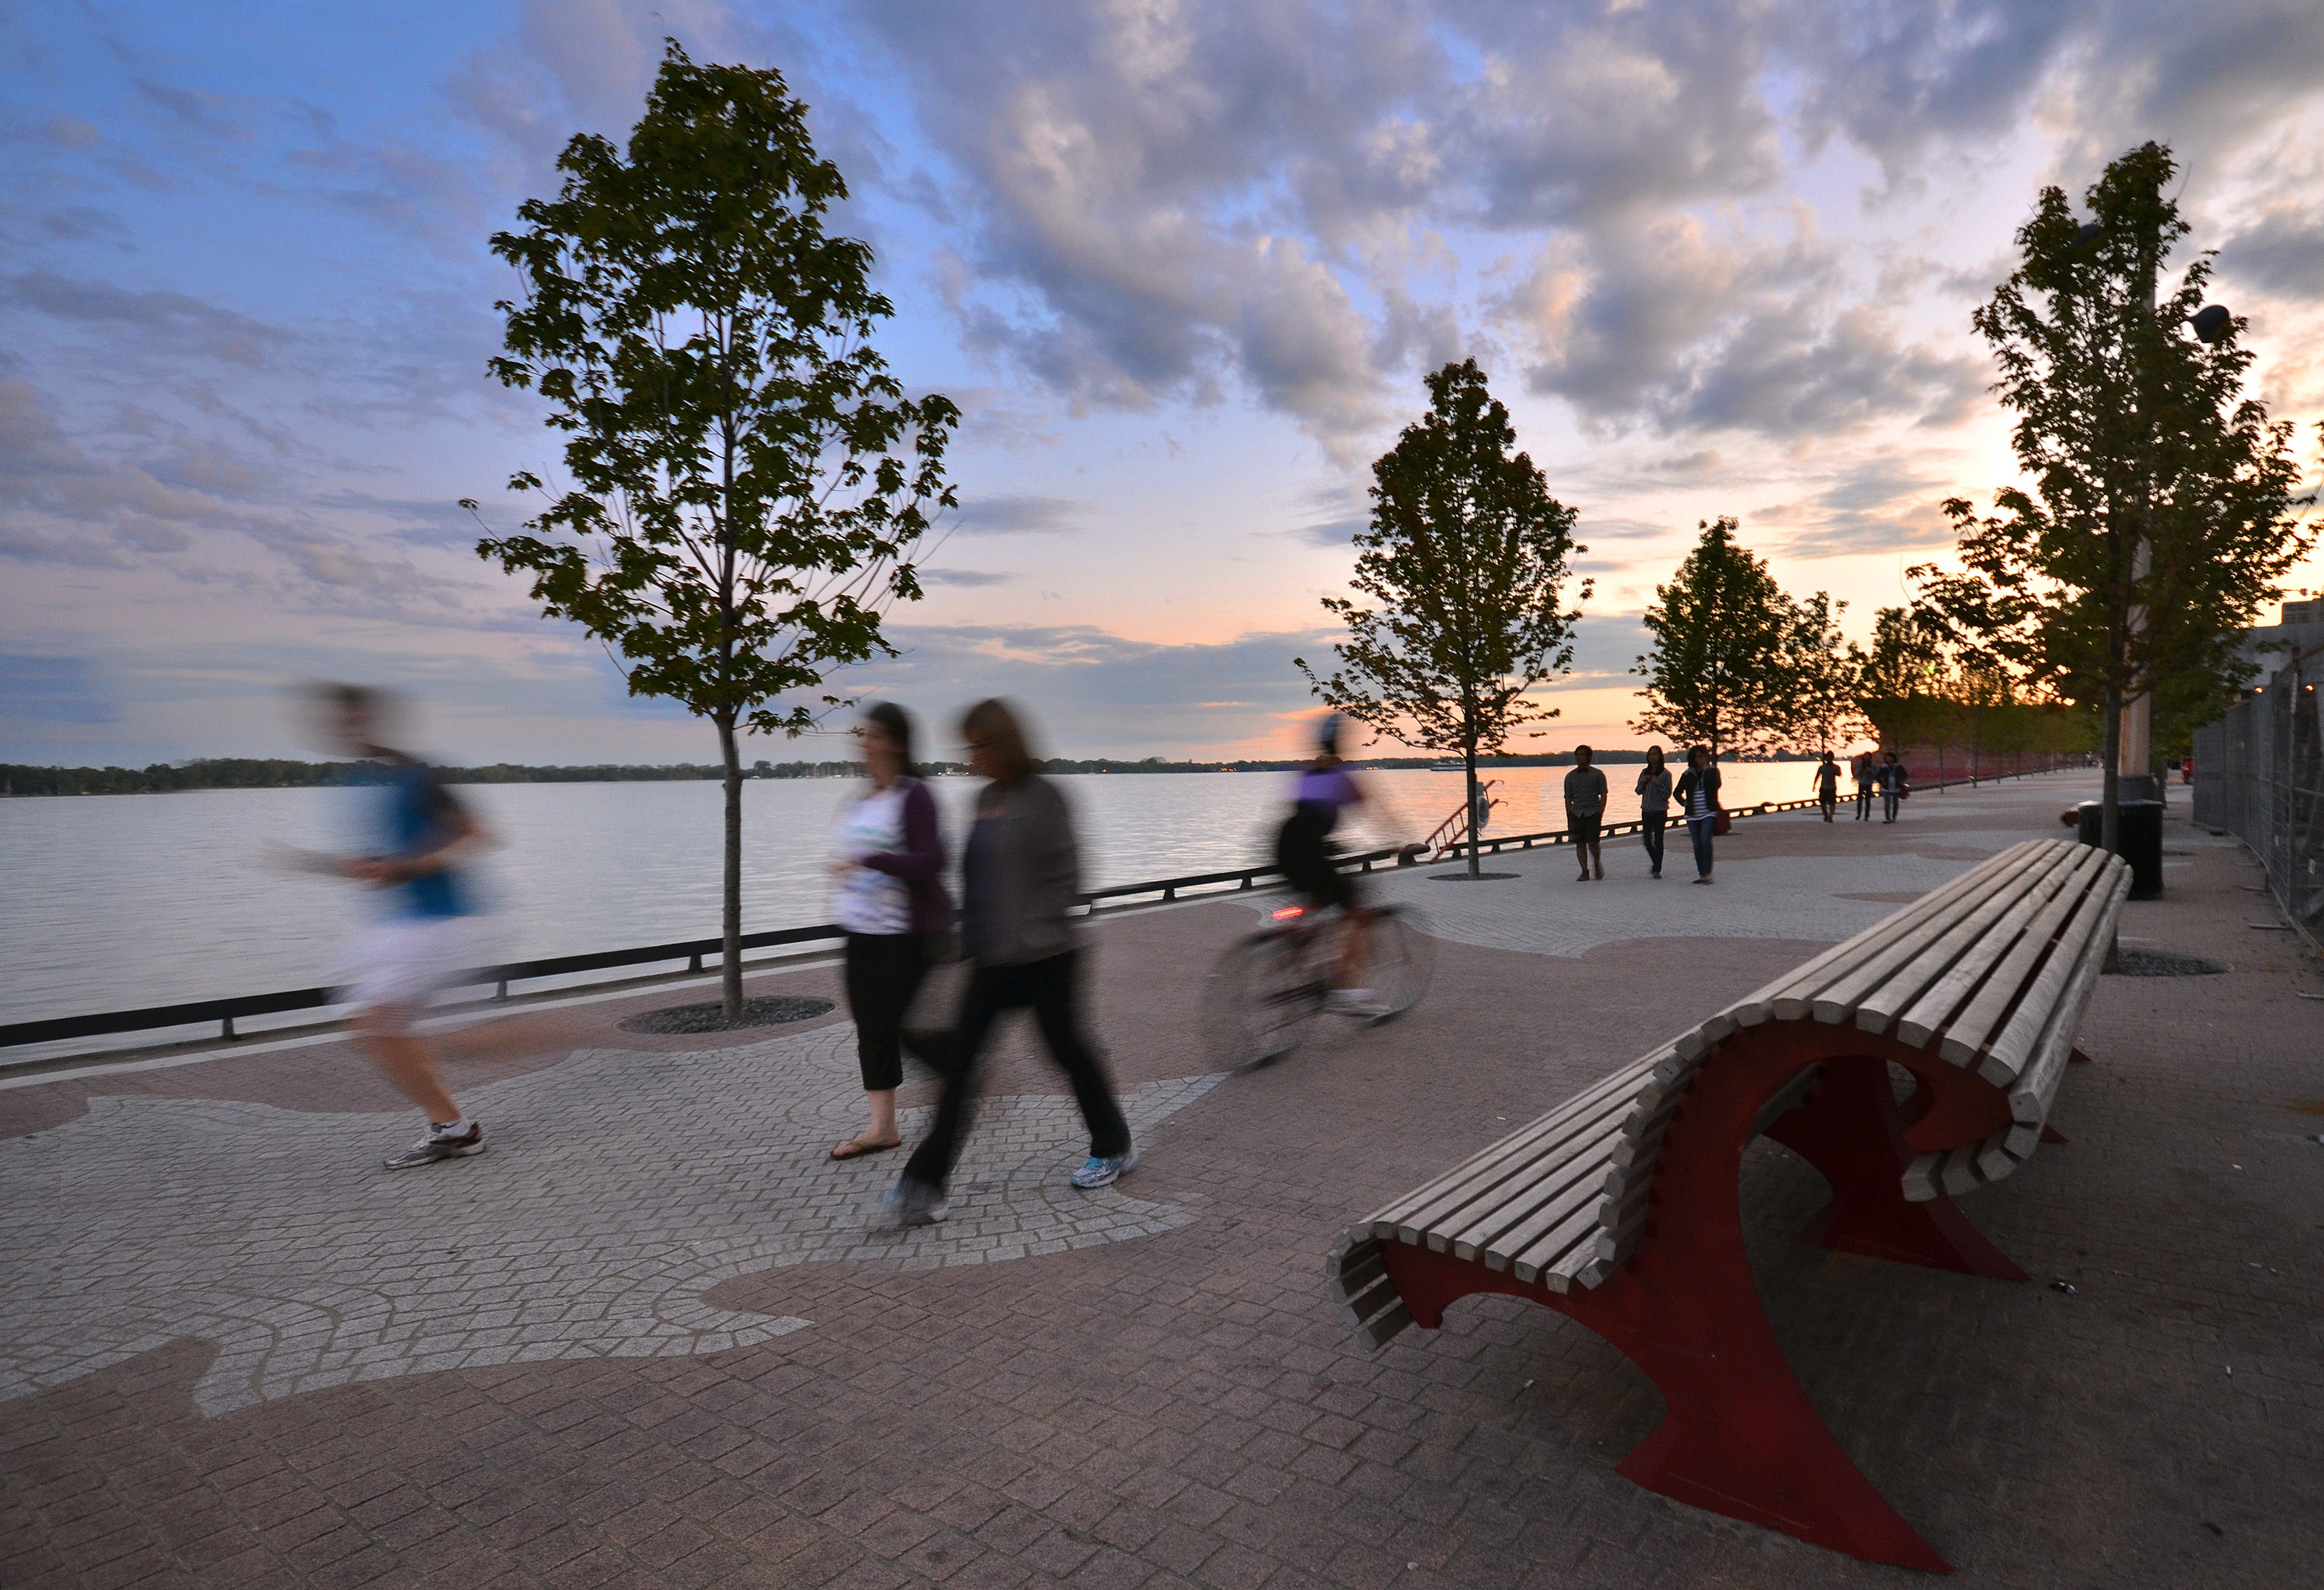 The water's edge promenade in East Bayfront.